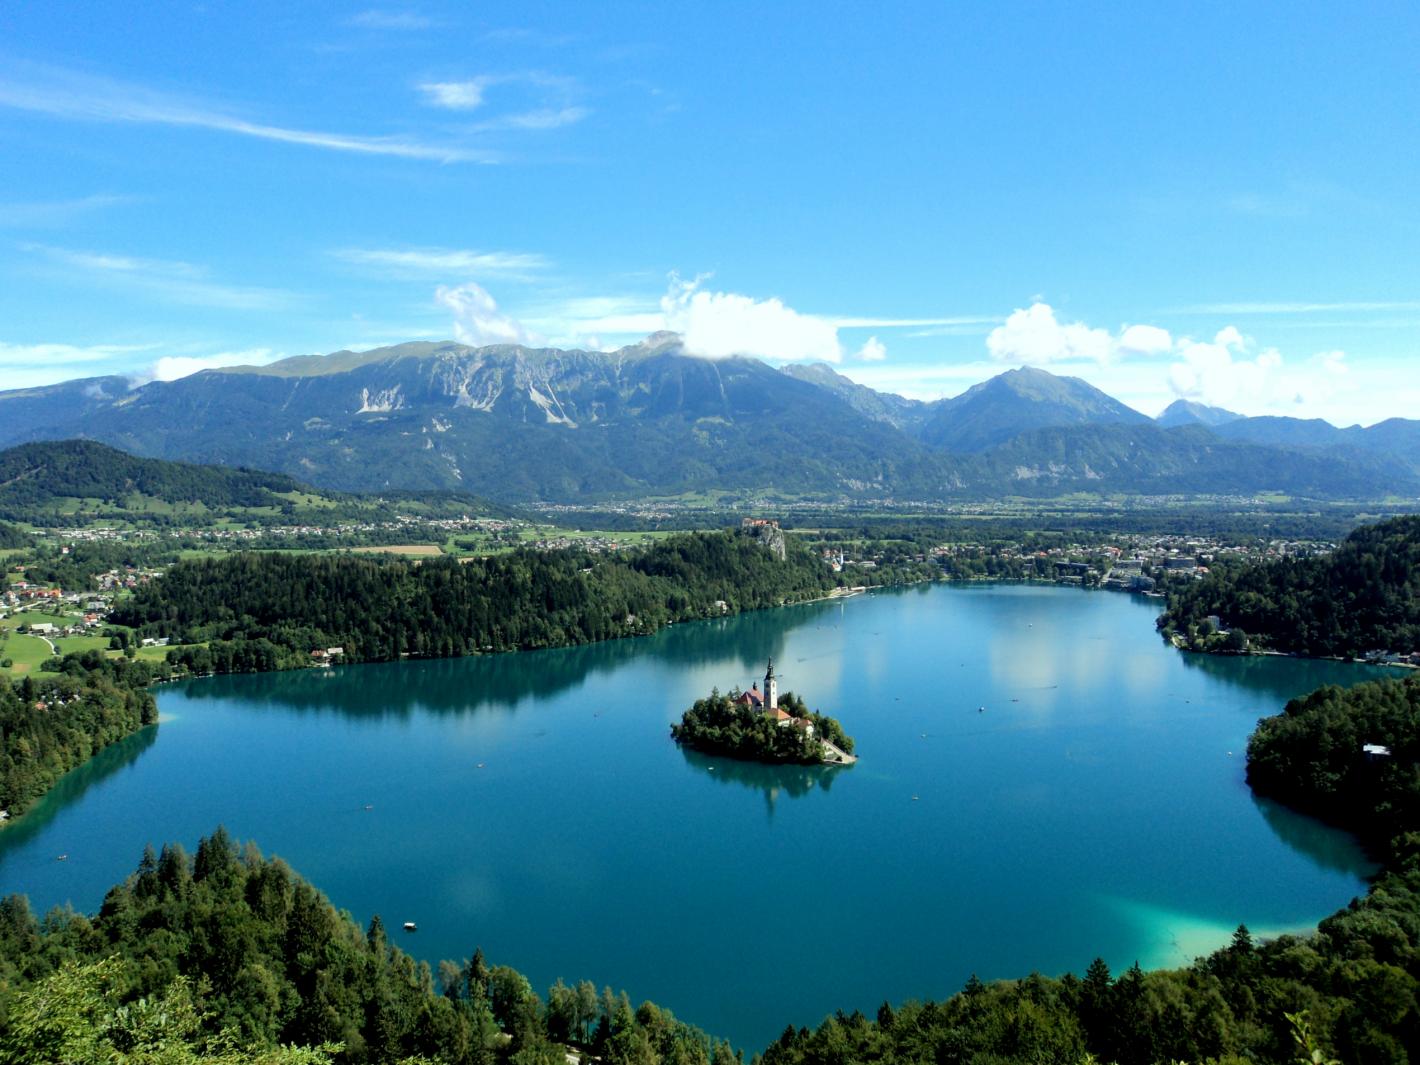 images/2019/gare_internazionali/ETU_CUP/Bled/medium/Lake_Bled_from_the_Mountain.jpg